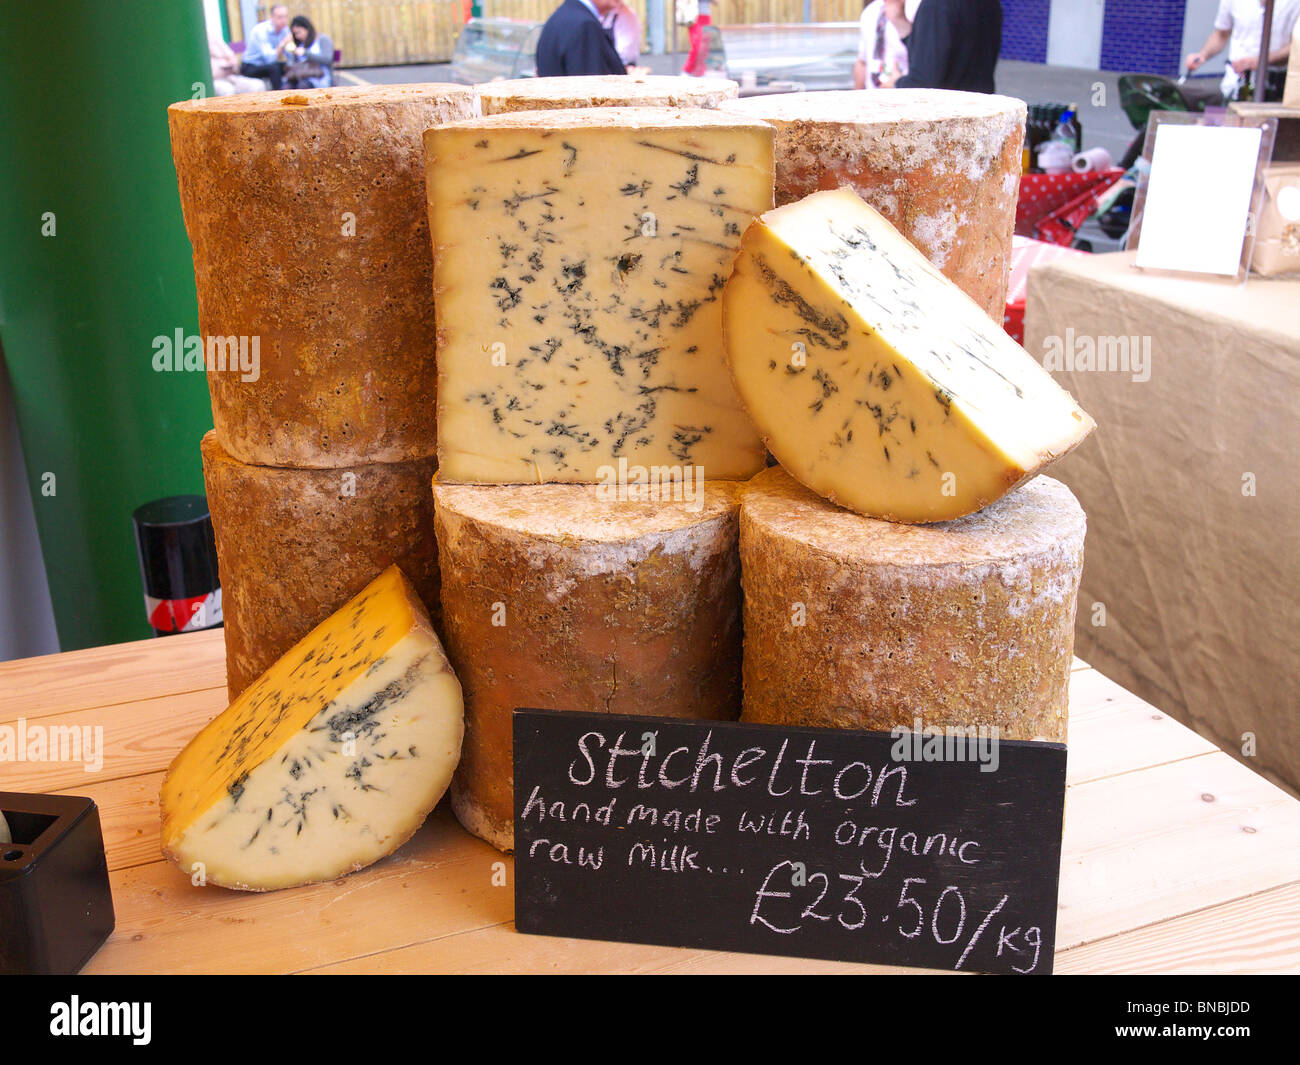 Stichelton cheeses on display for sale on a stall at Borough Market Stock Photo